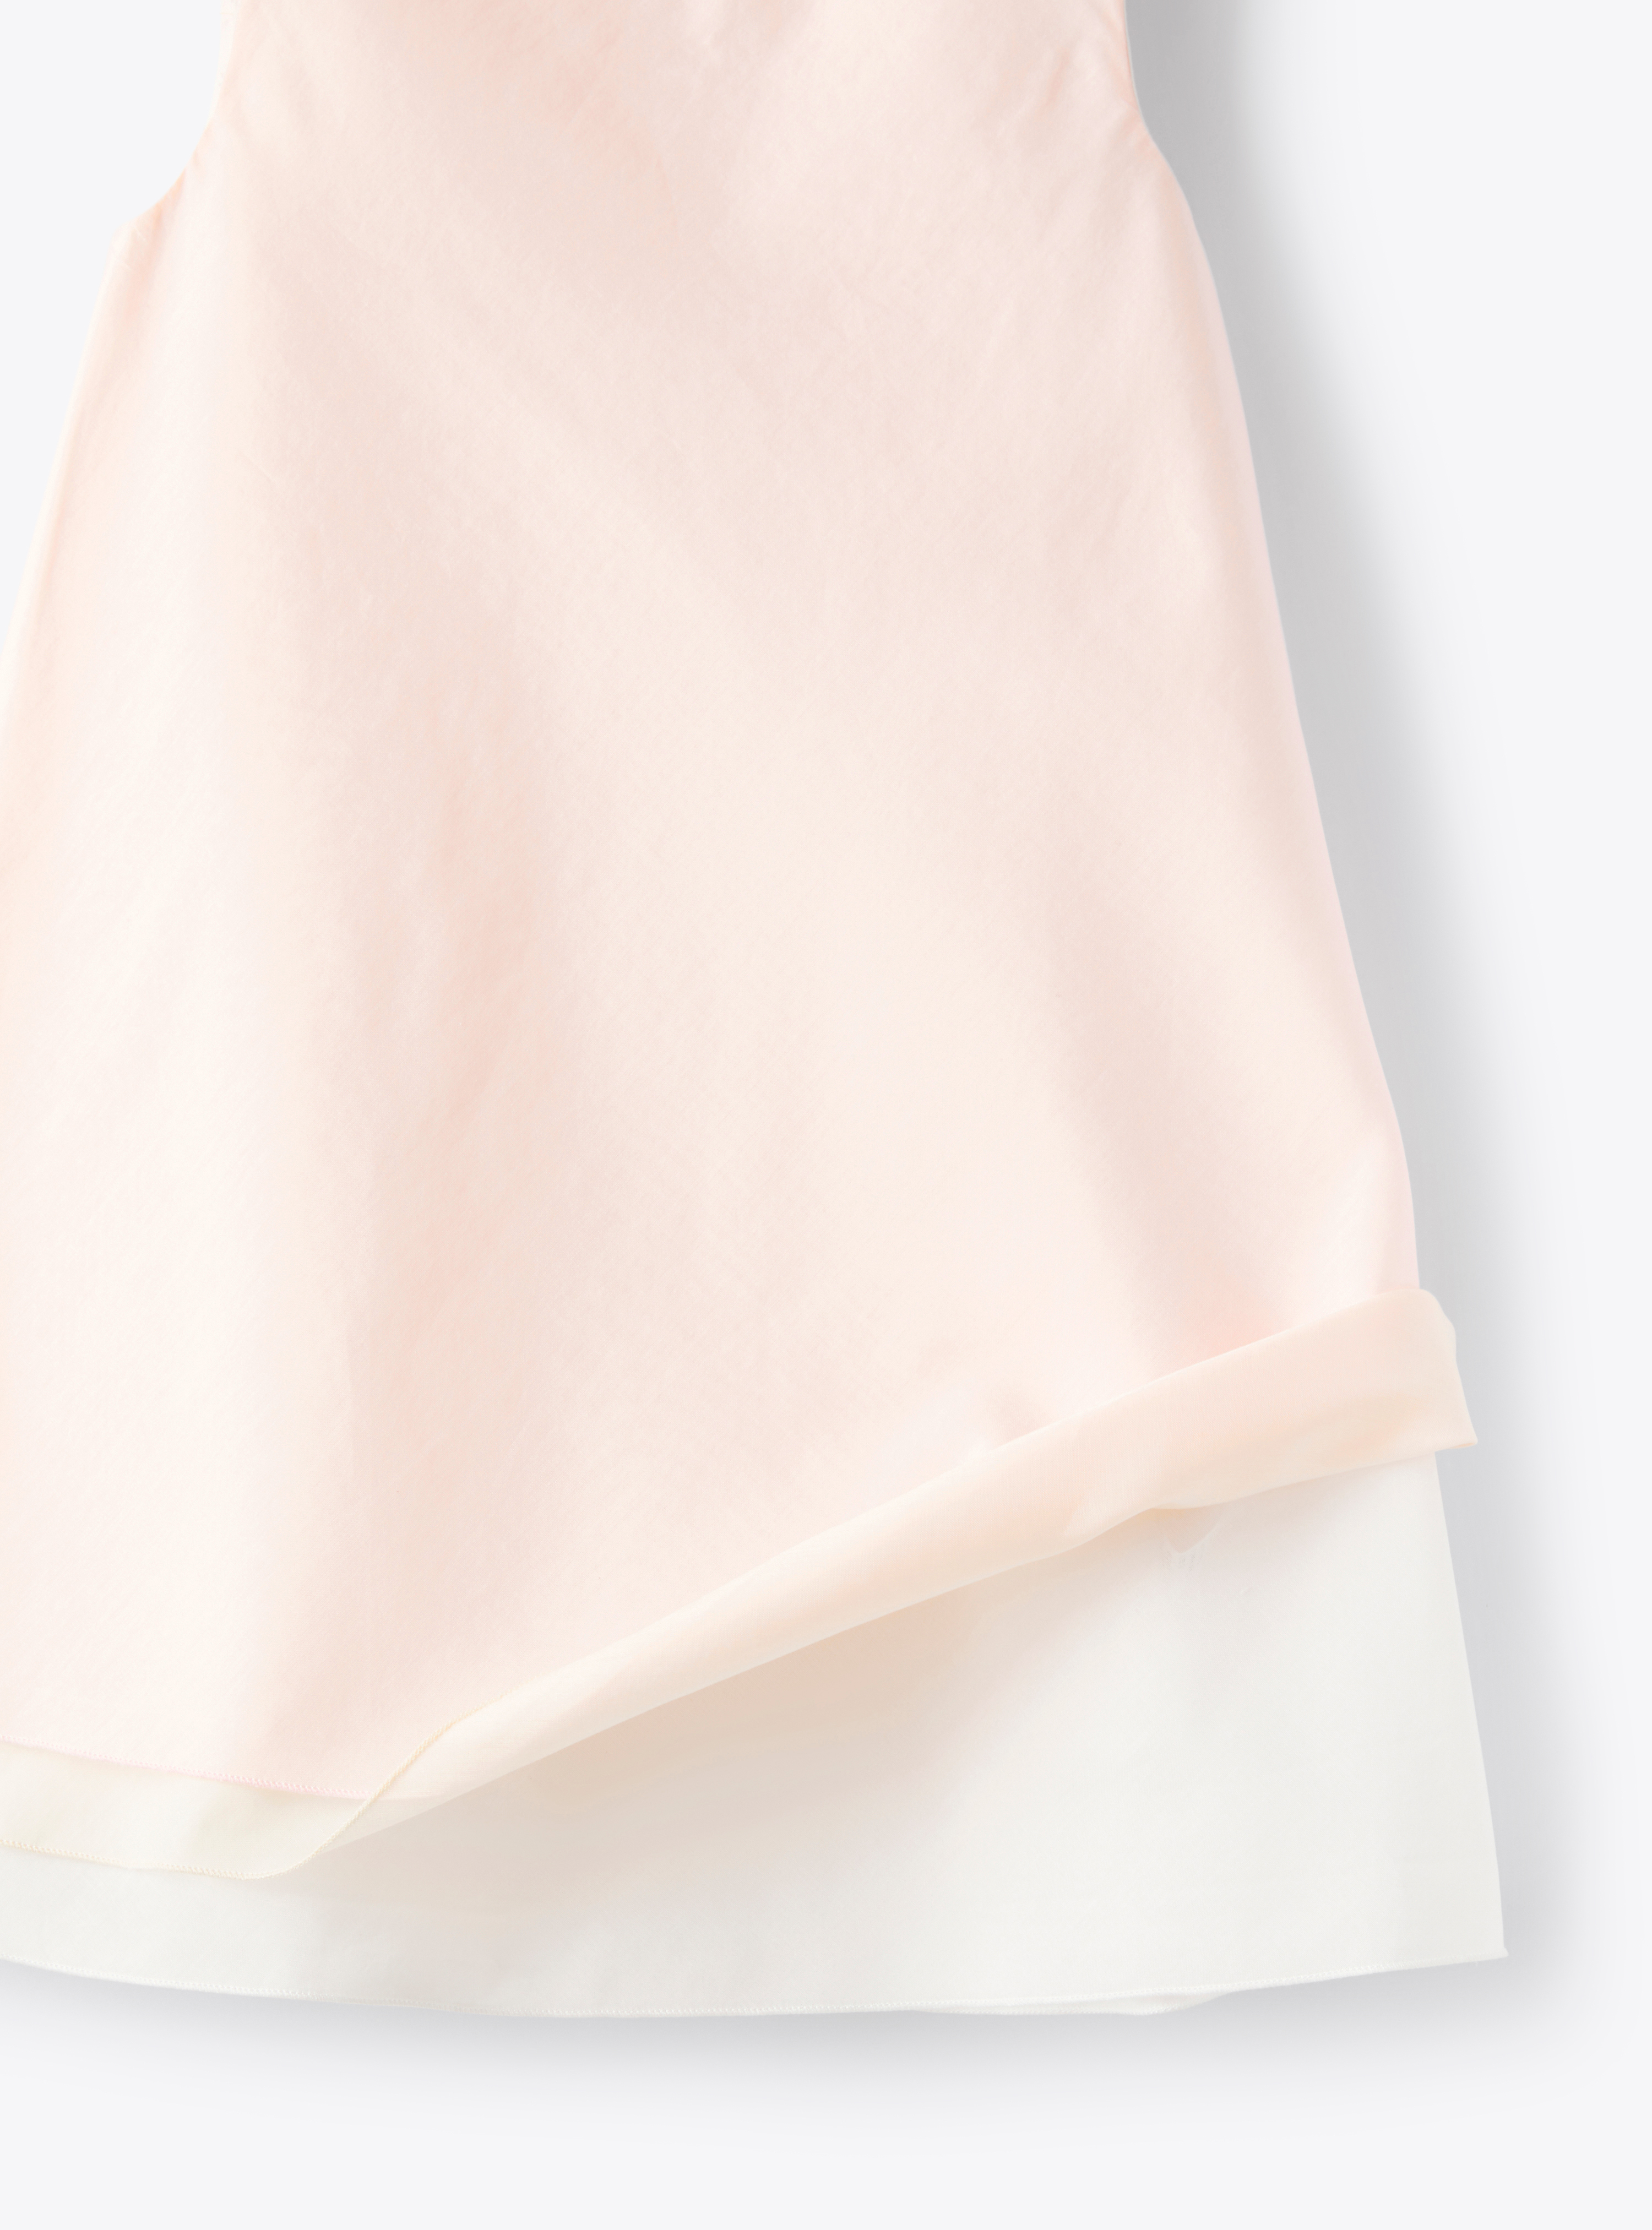 Dress in pearl-pink cotton voile with three tiers - Pink | Il Gufo